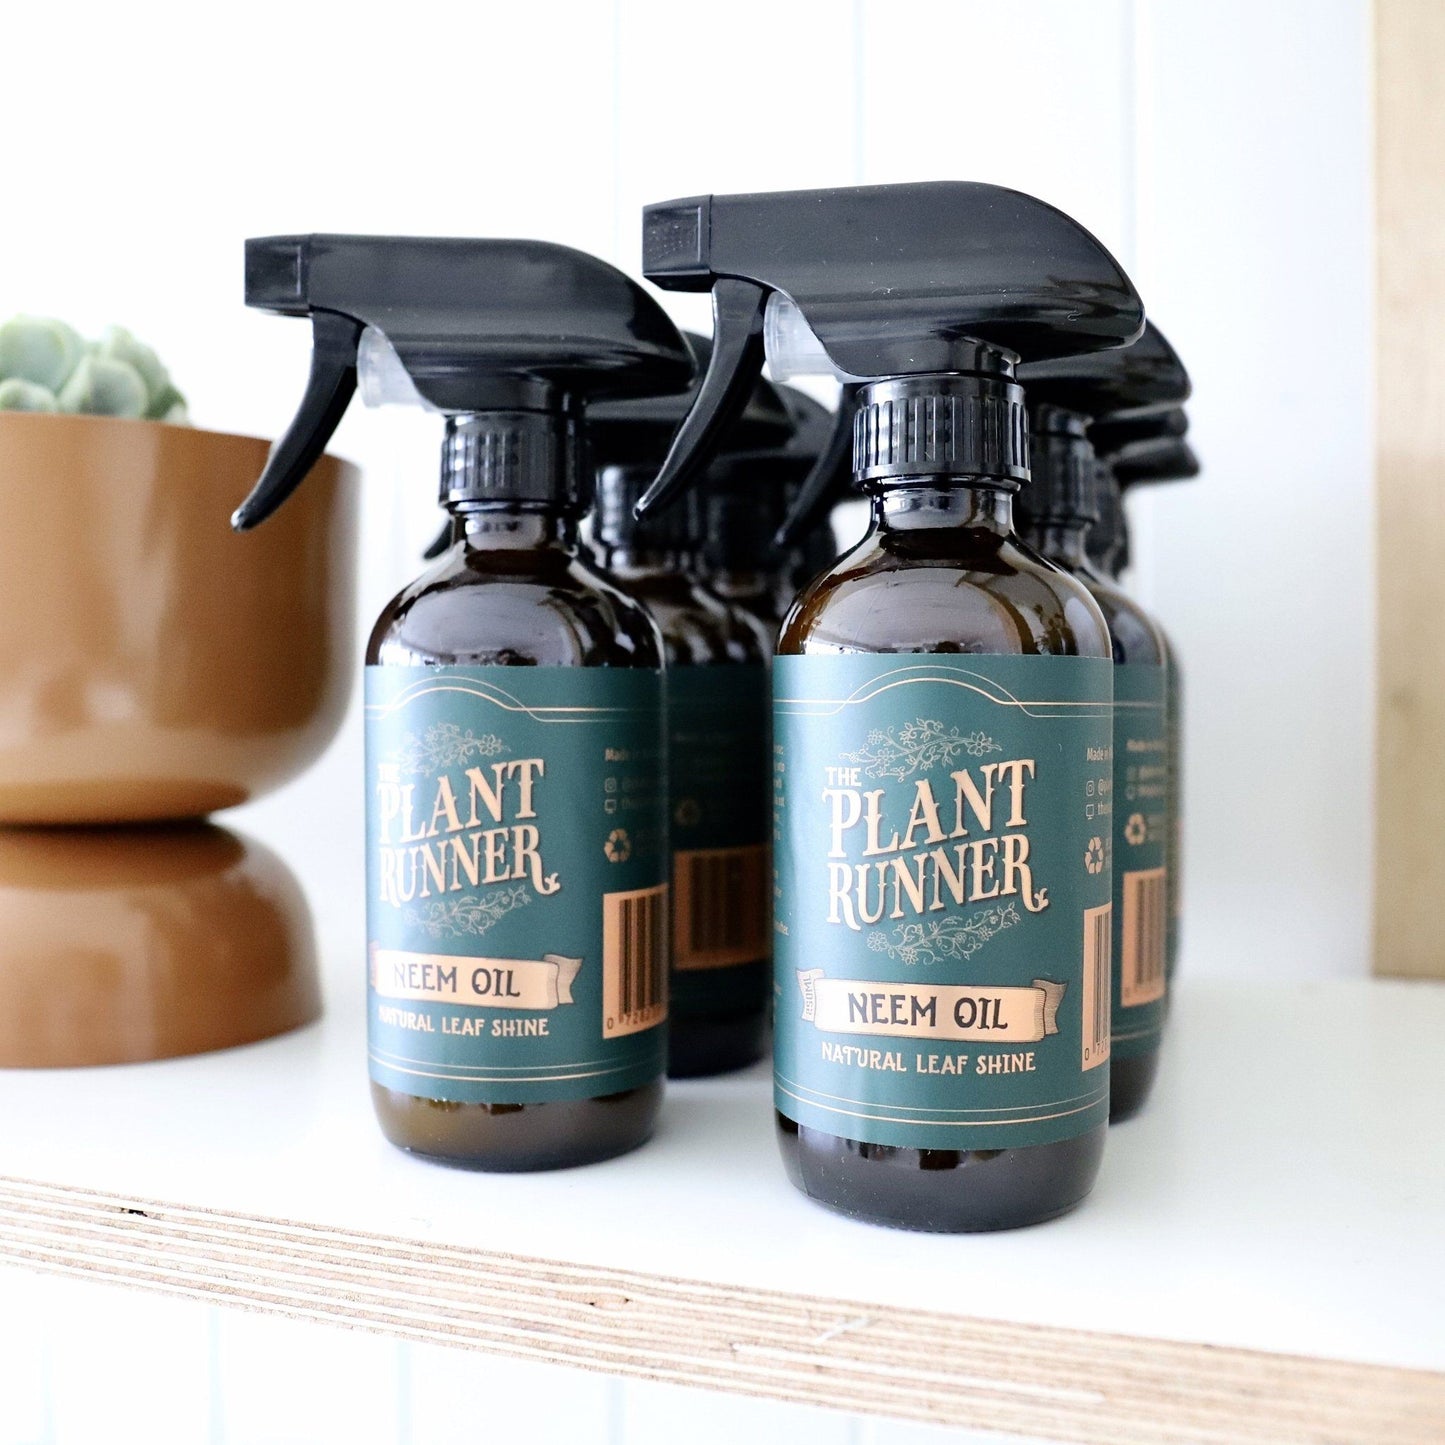 Neem Oil Leaf Shine by The Plant Runner - Toast and honey studio